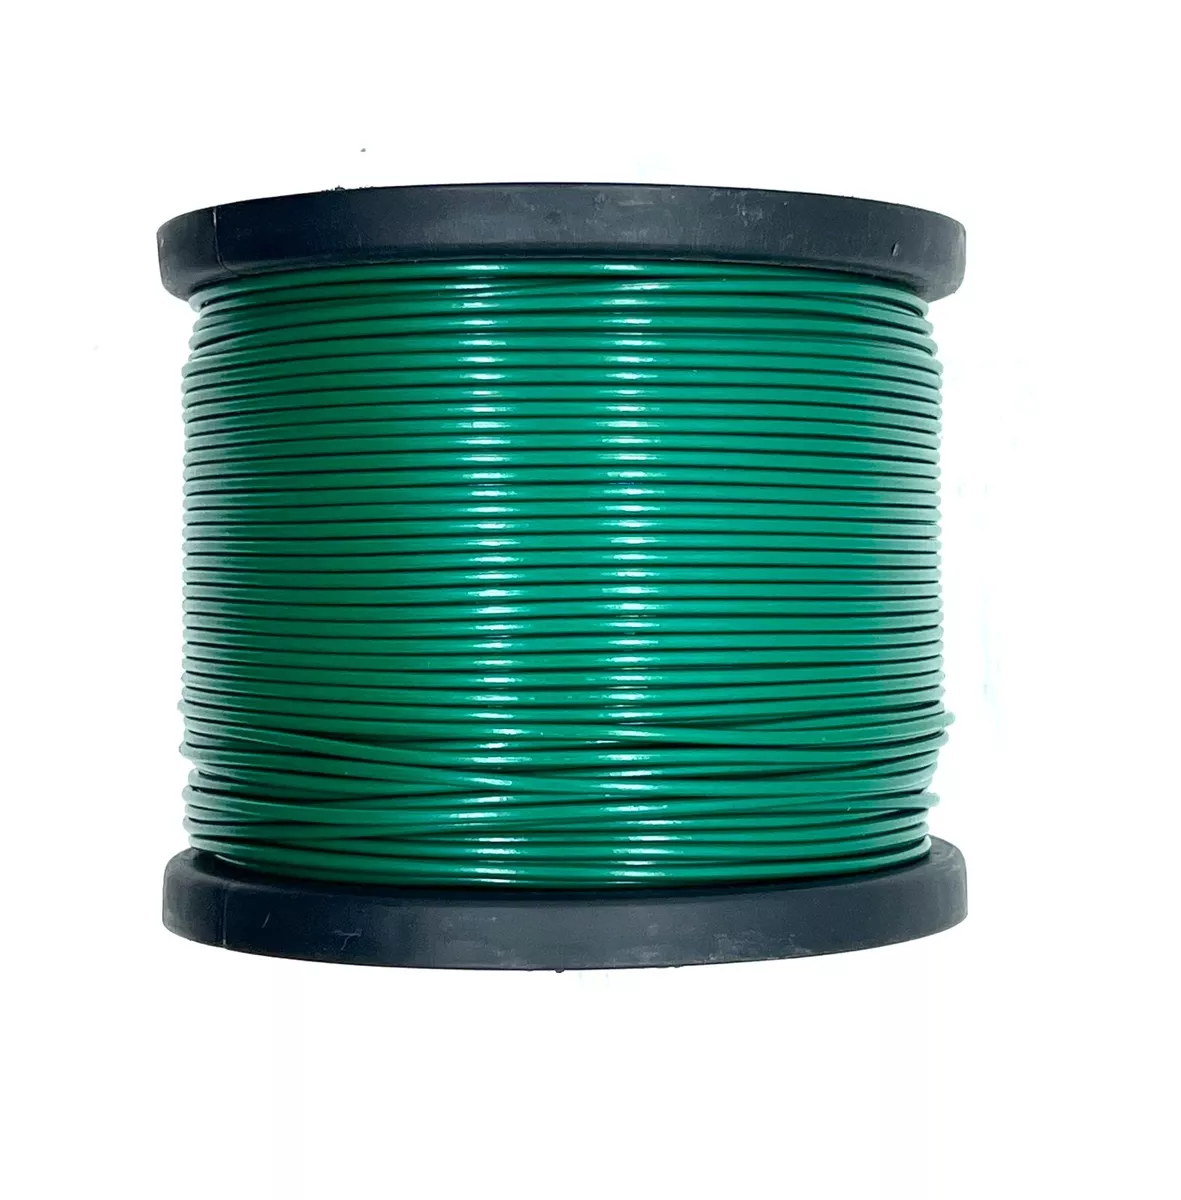 GREEN Vinyl Coated Wire Rope Cable,1/16 - 3/32, 7x7, 500 ft Reel